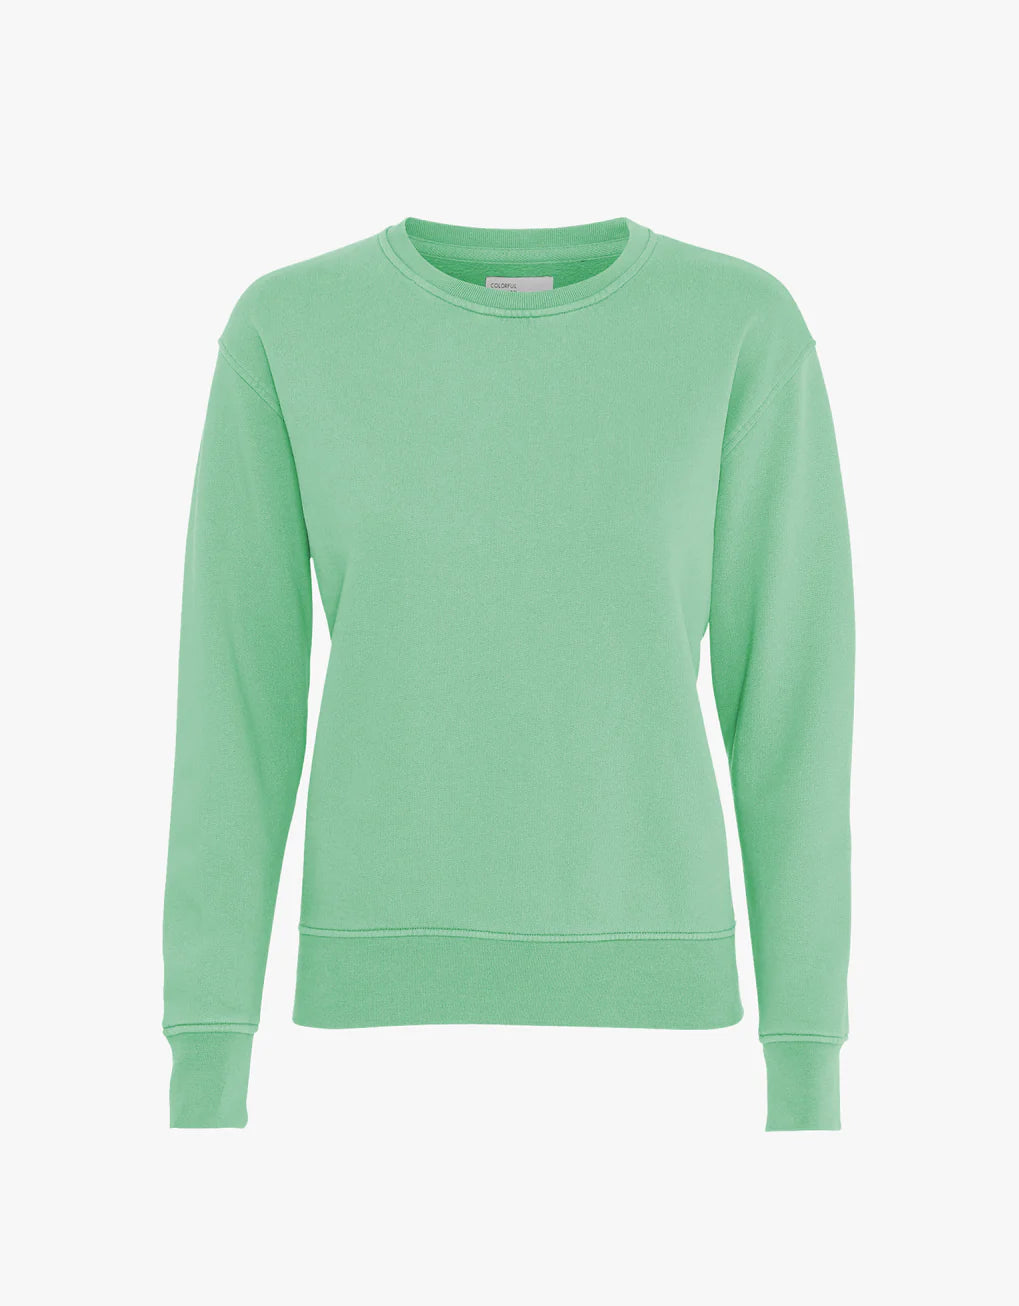 A Colorful Standard Classic Organic Crew sweatshirt for women on a white background.